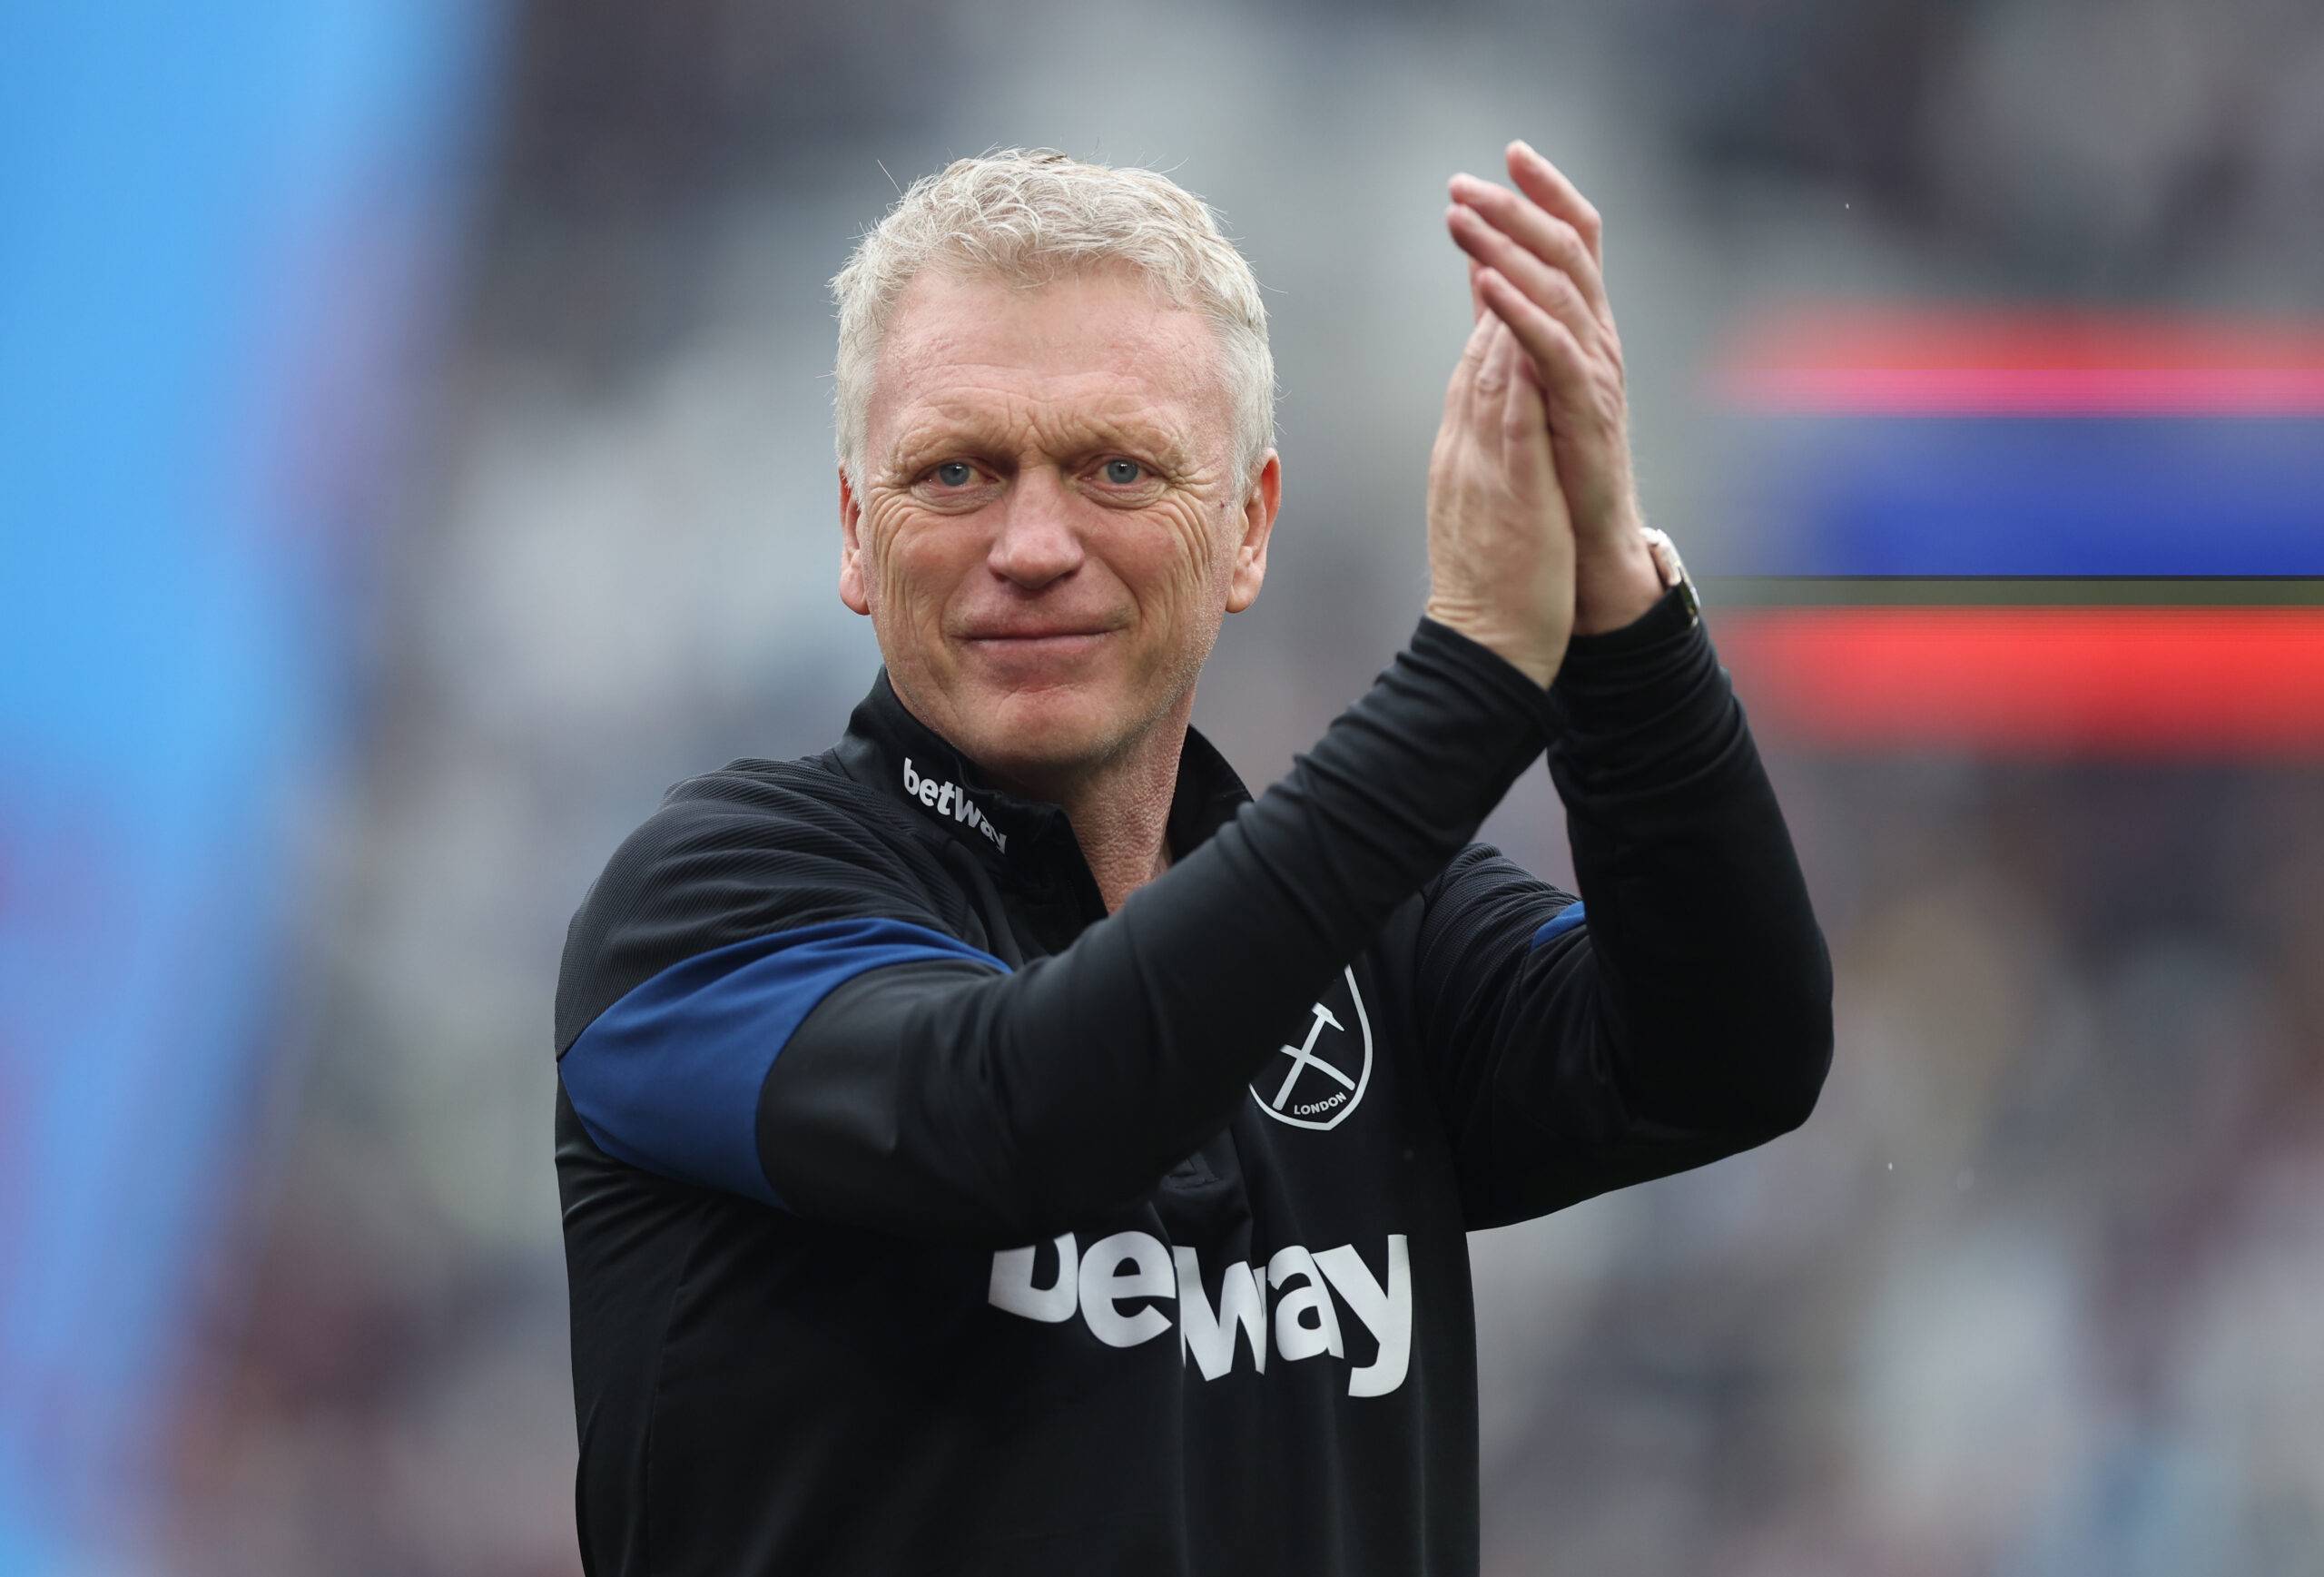 West Ham boss David Moyes smiling and clapping